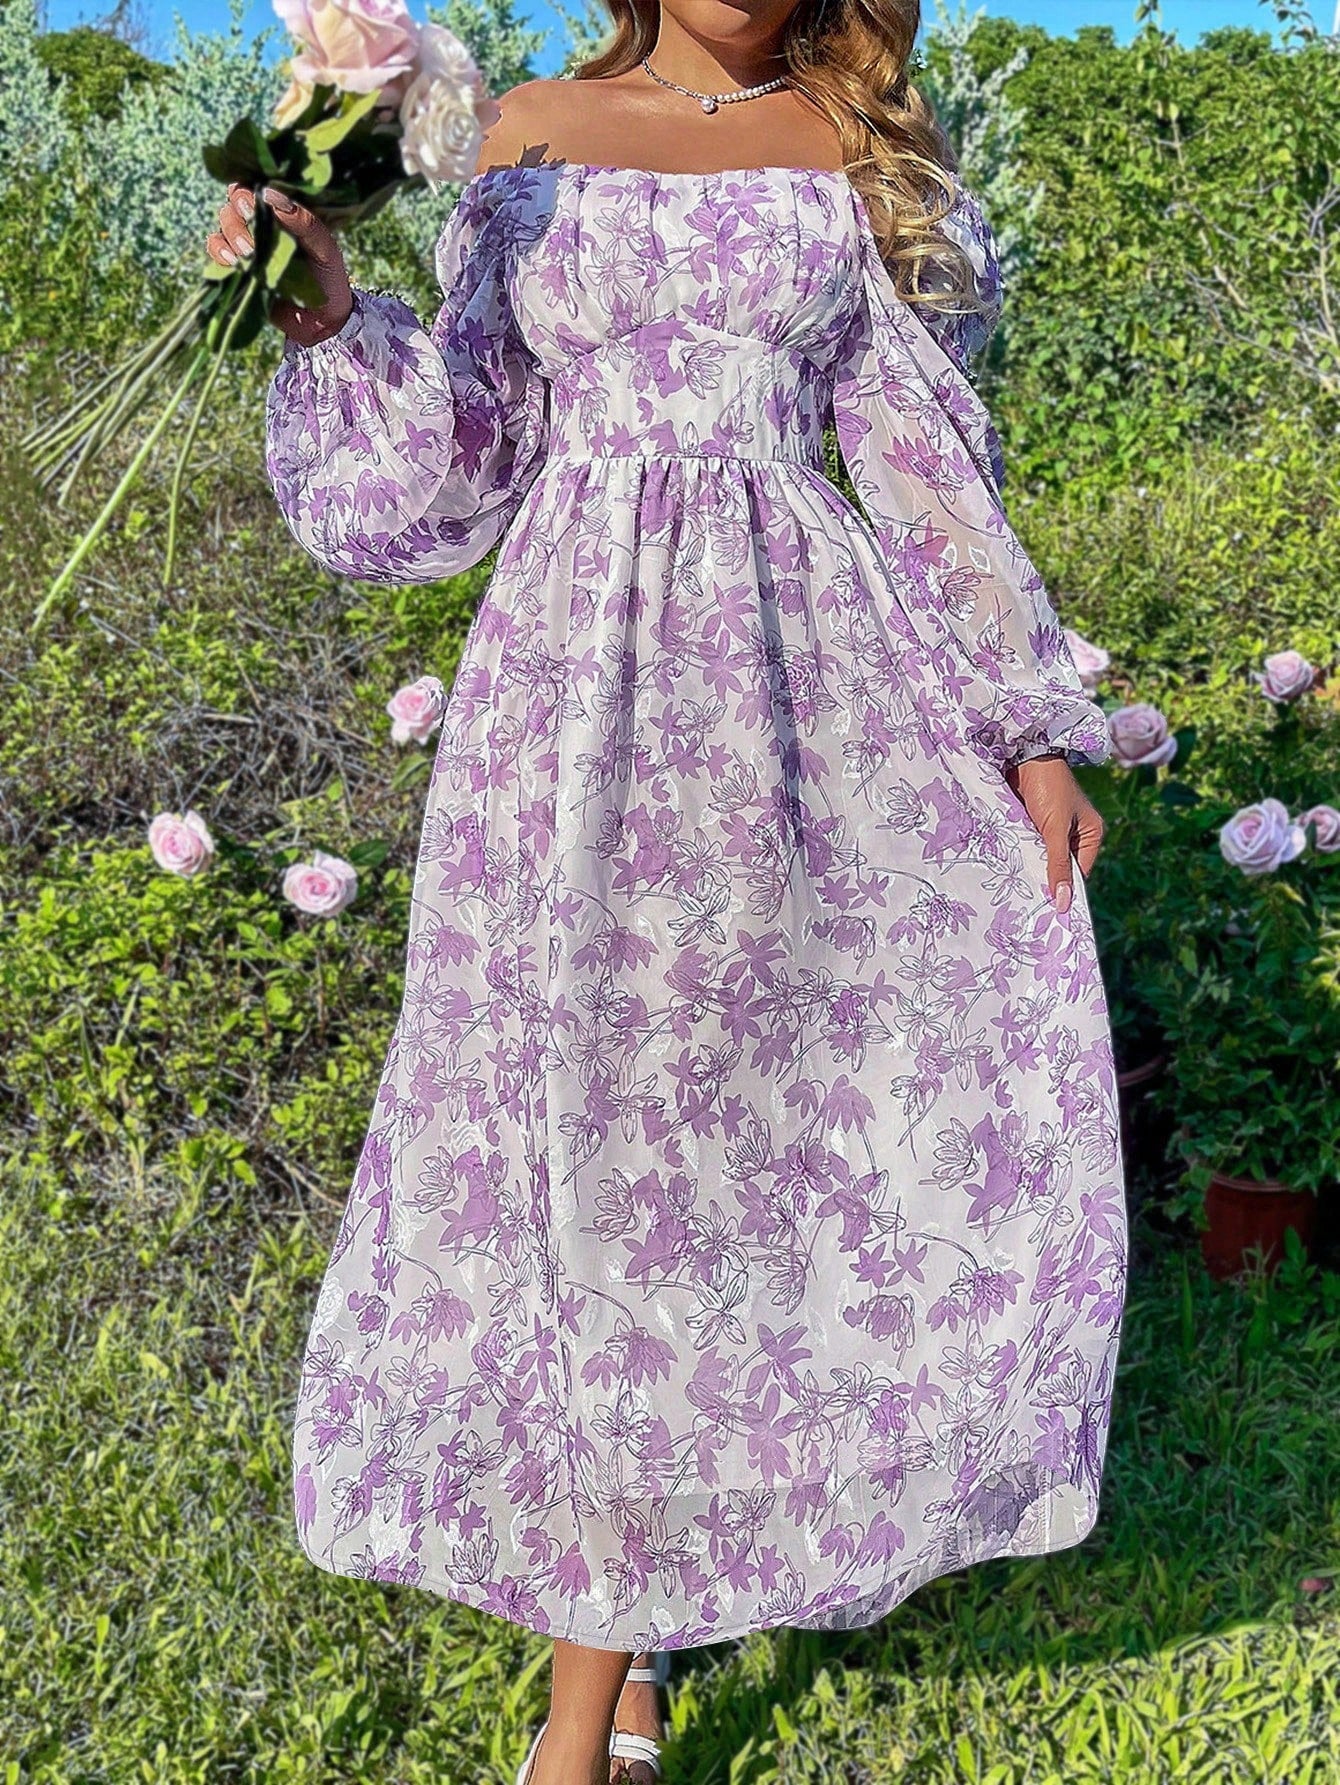 Pardon Me Chiffon Flower Print Dress With Ruched Bust And Romantic Long Lantern Sleeves